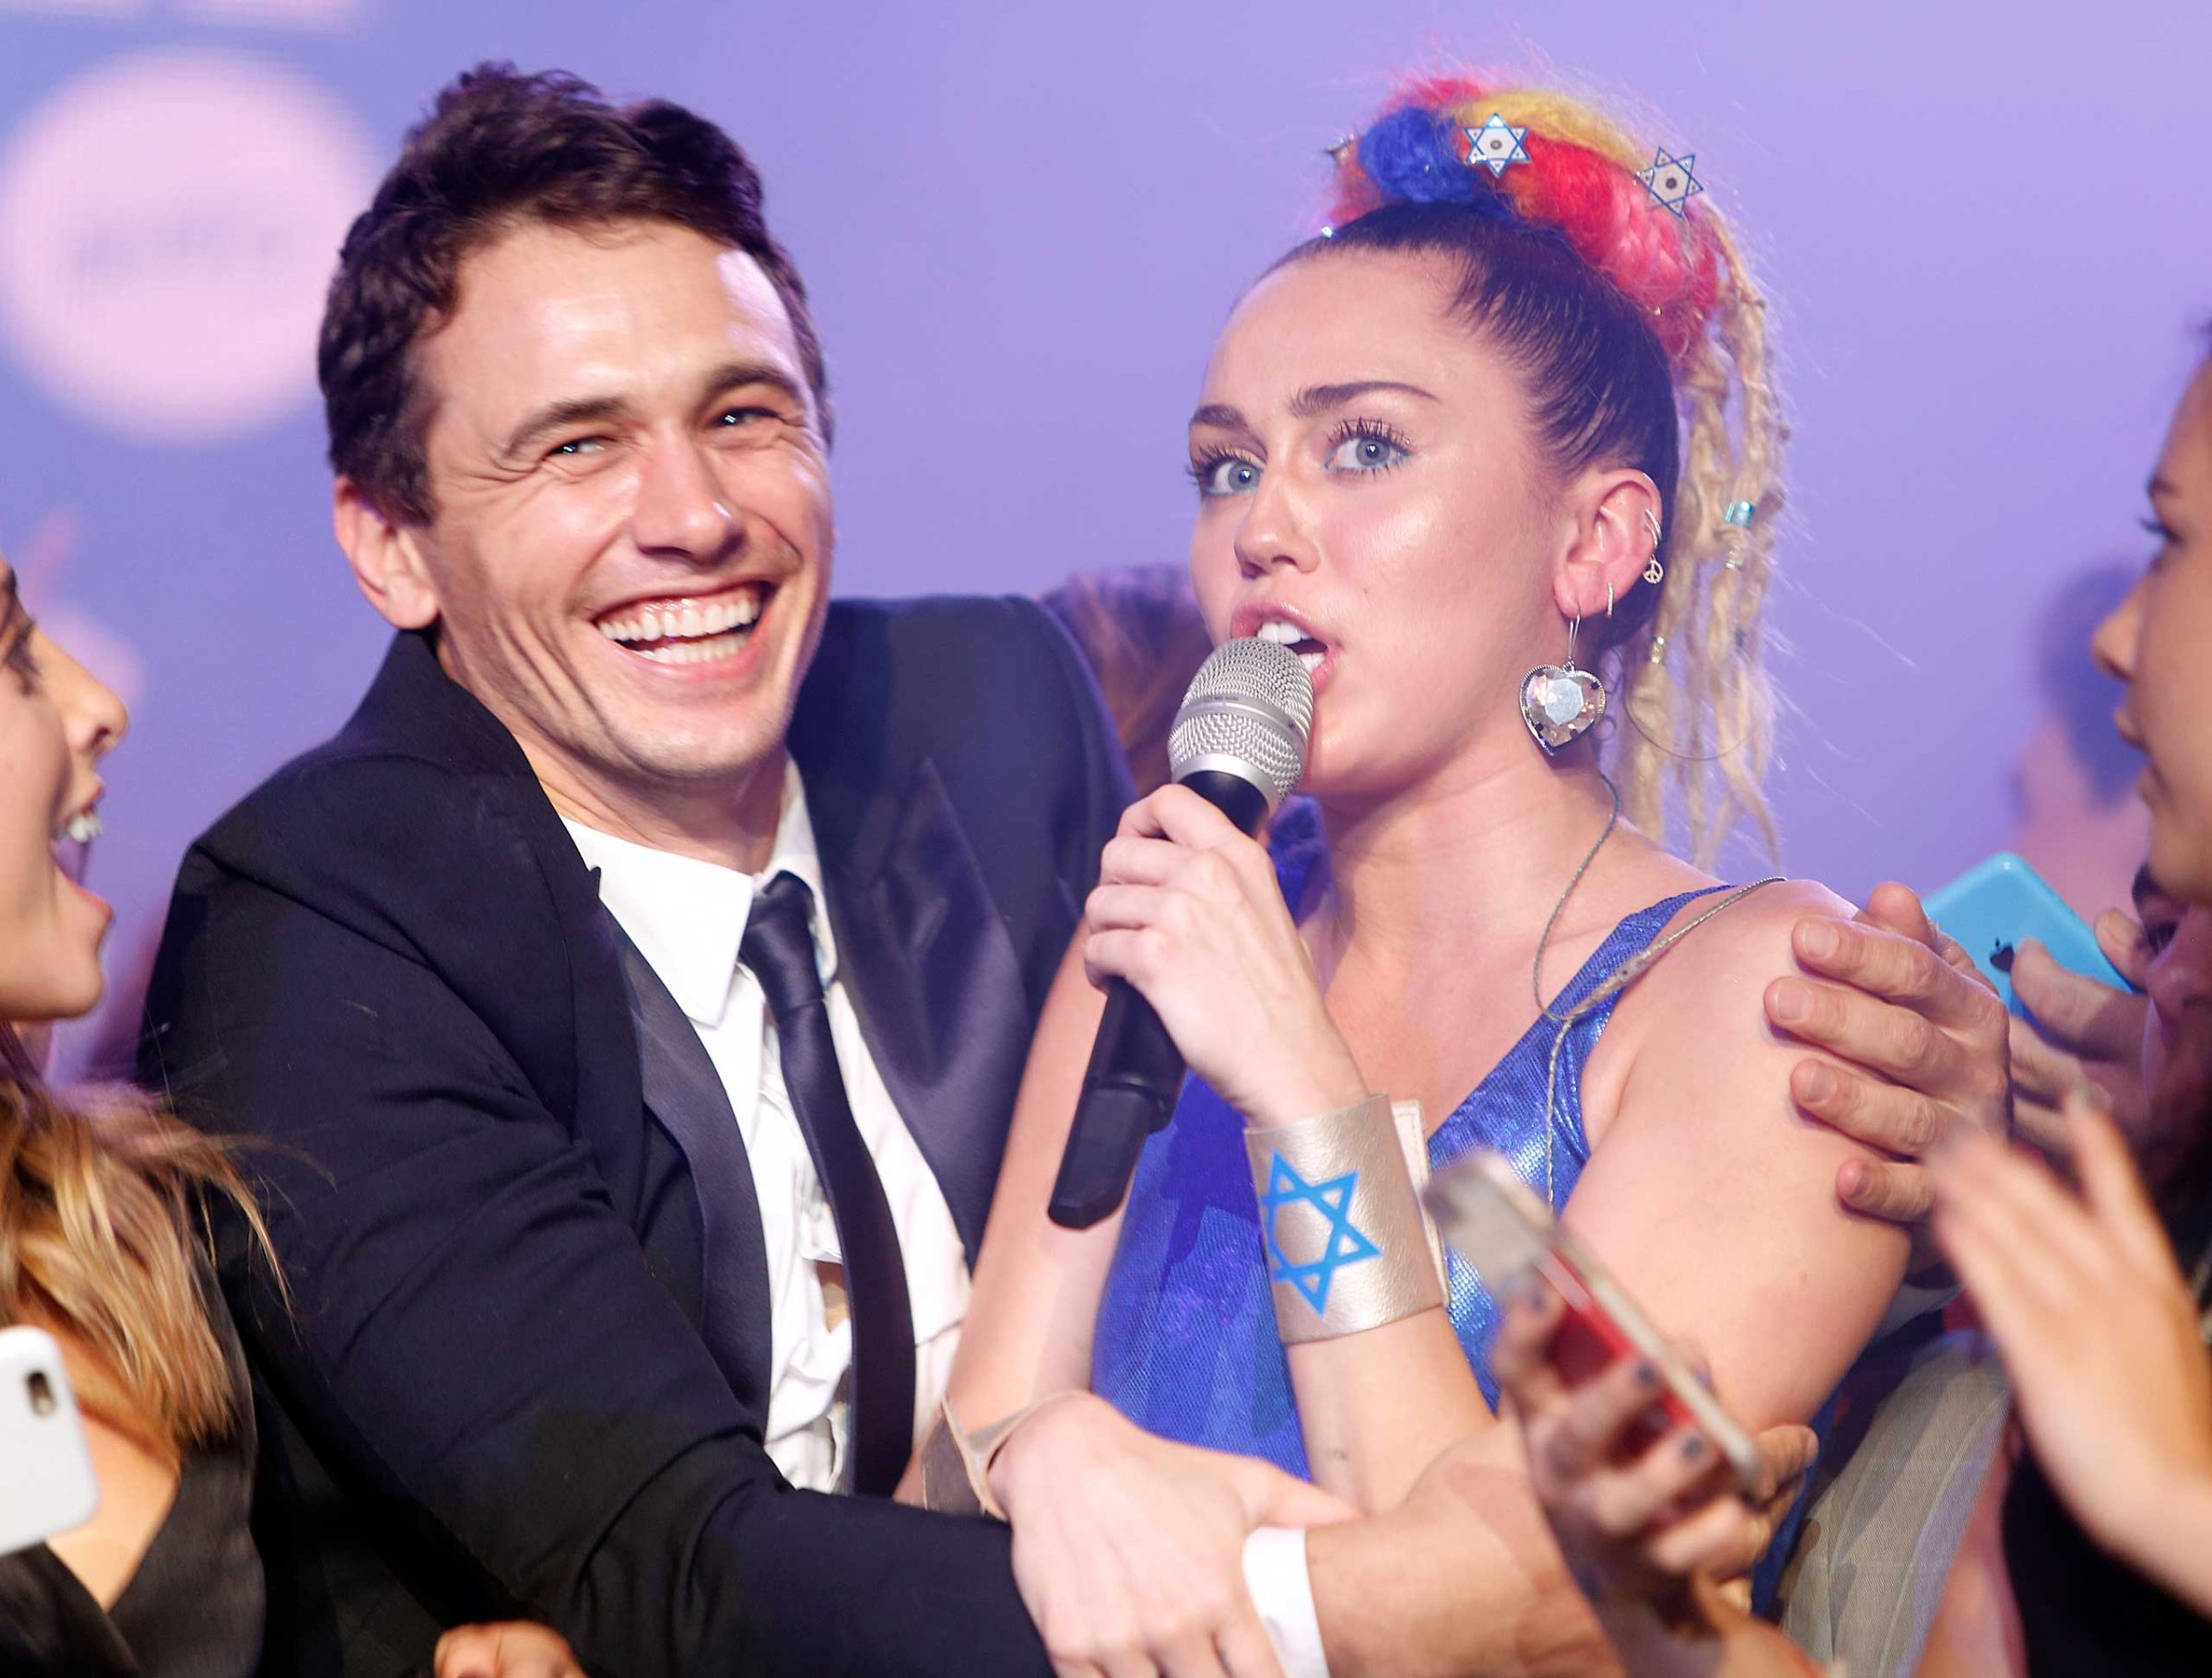 Hilarity For Charity's Annual Variety Show: James Franco's Bar Mitzvah Benefitting The Alzheimer's Association Presented By Funny Or Die And go90